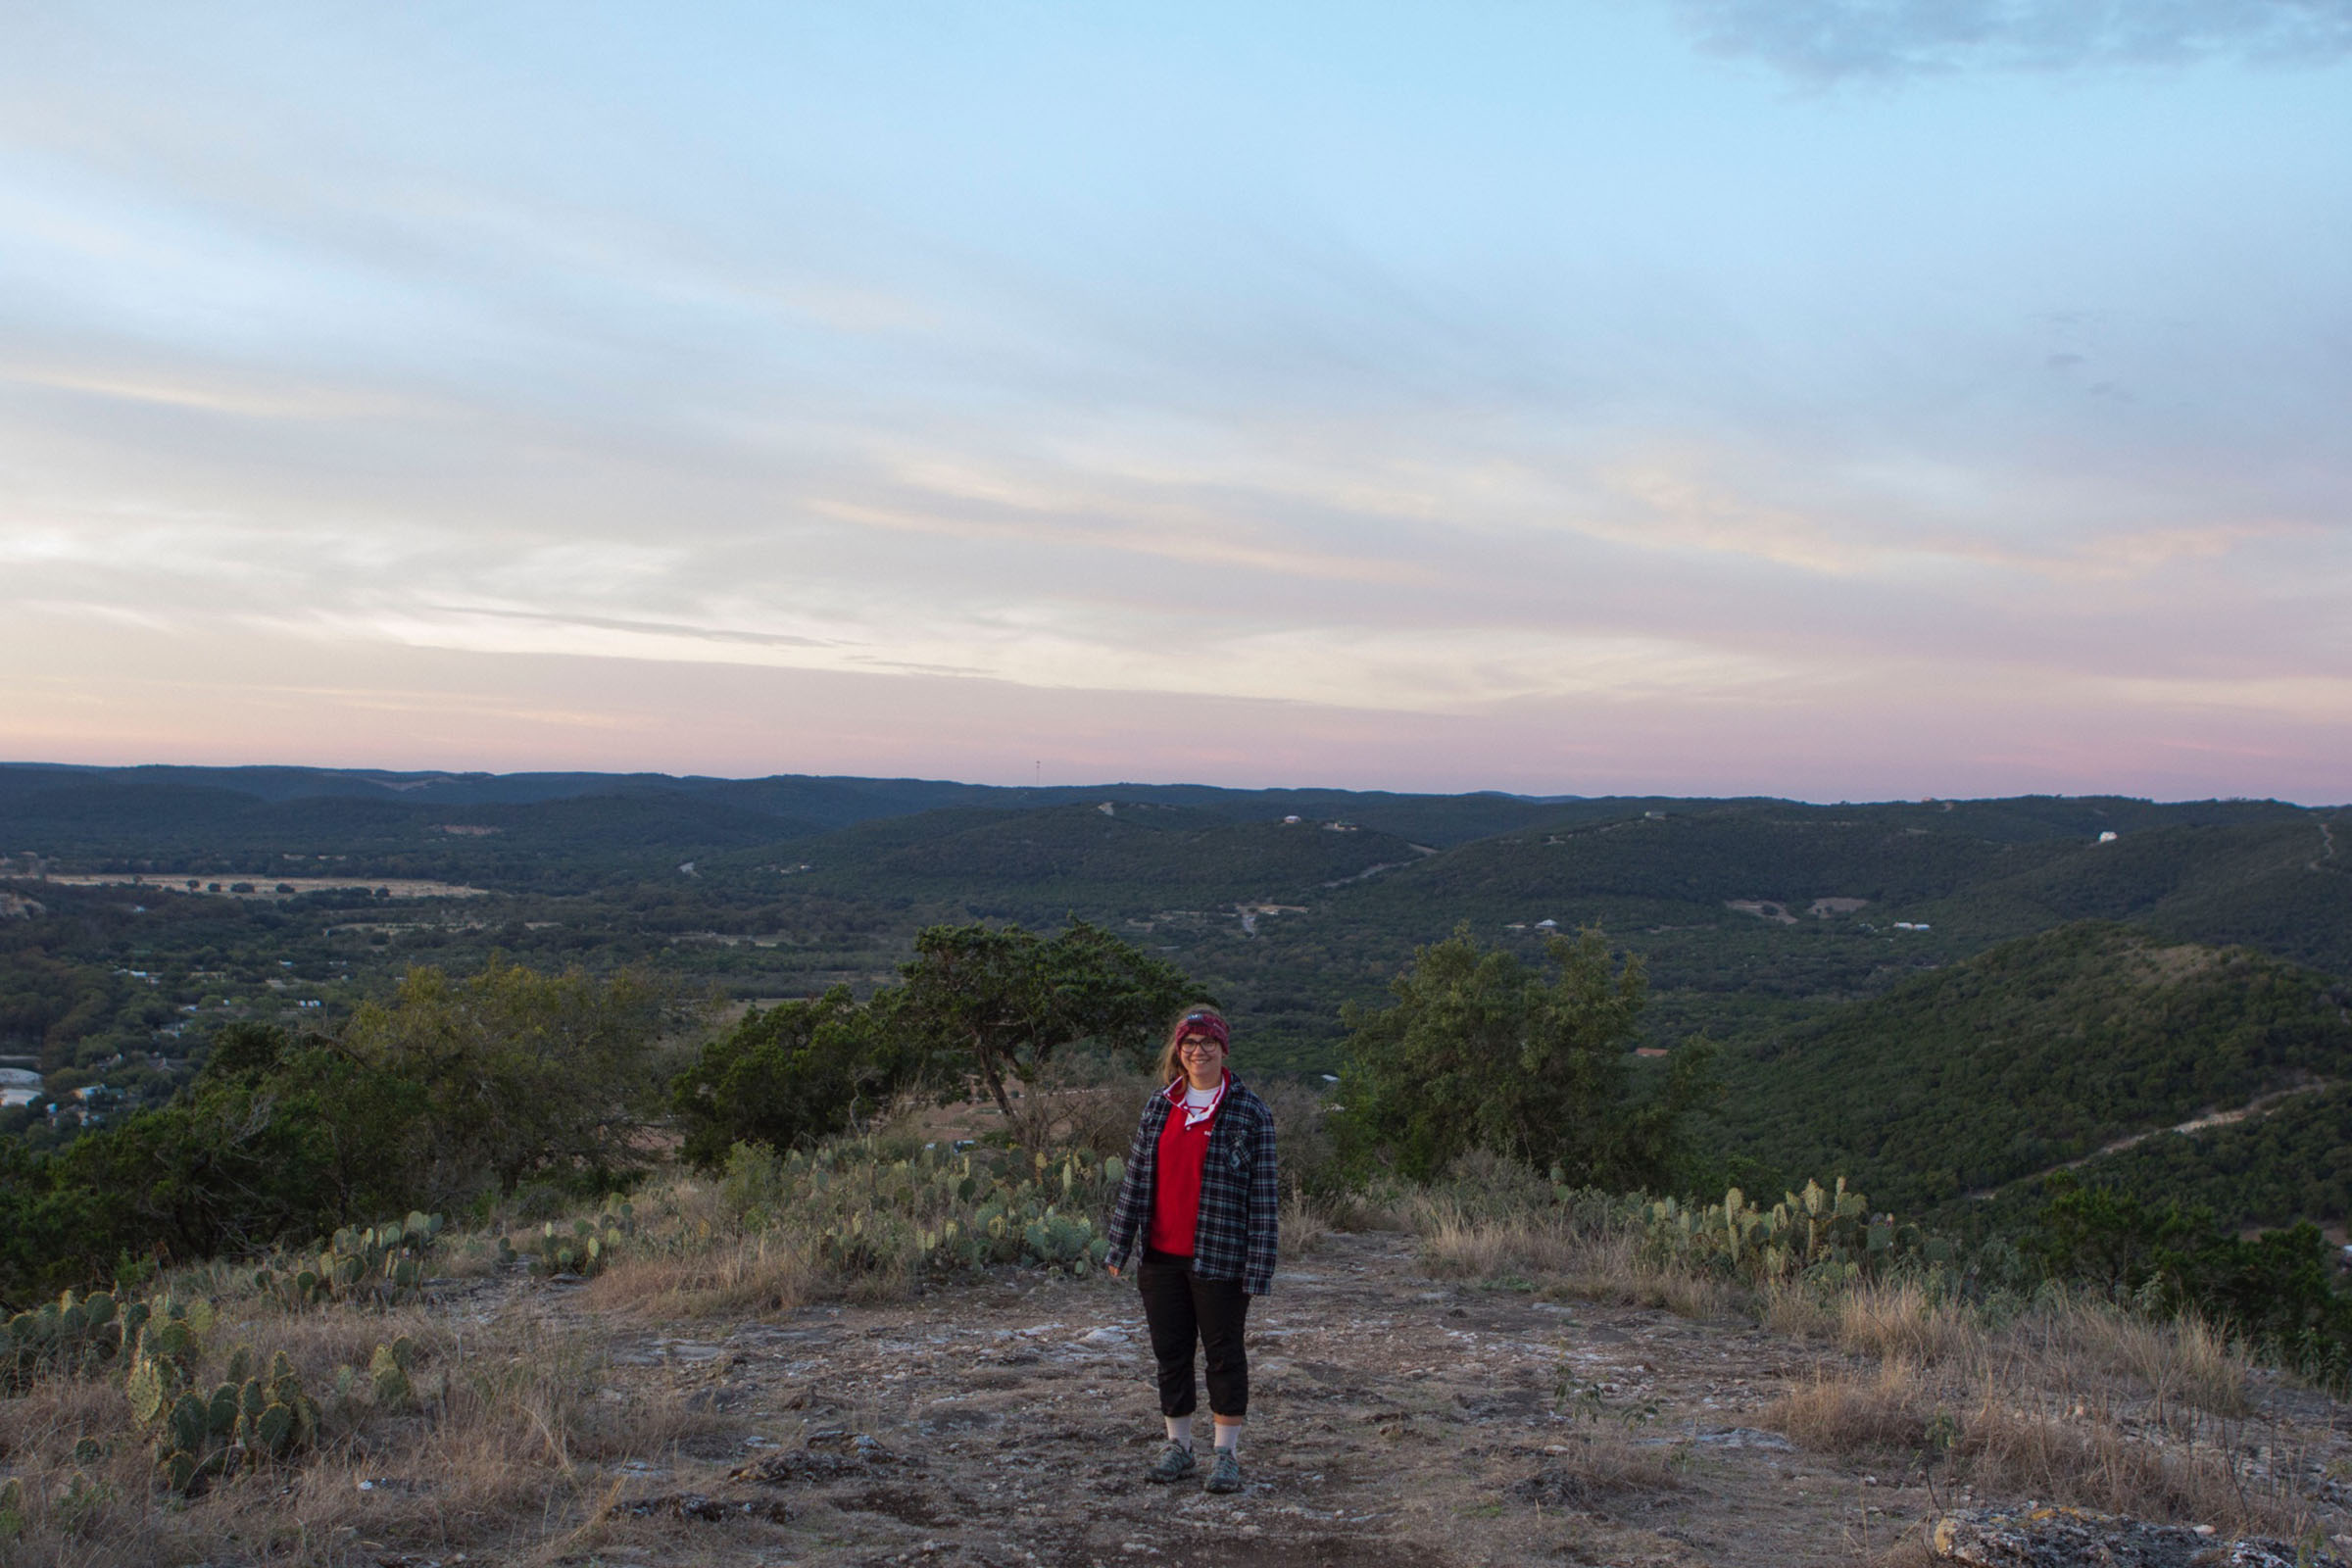 A woman stands at the top of the hill called Old Baldy in Garner State Park, Texas